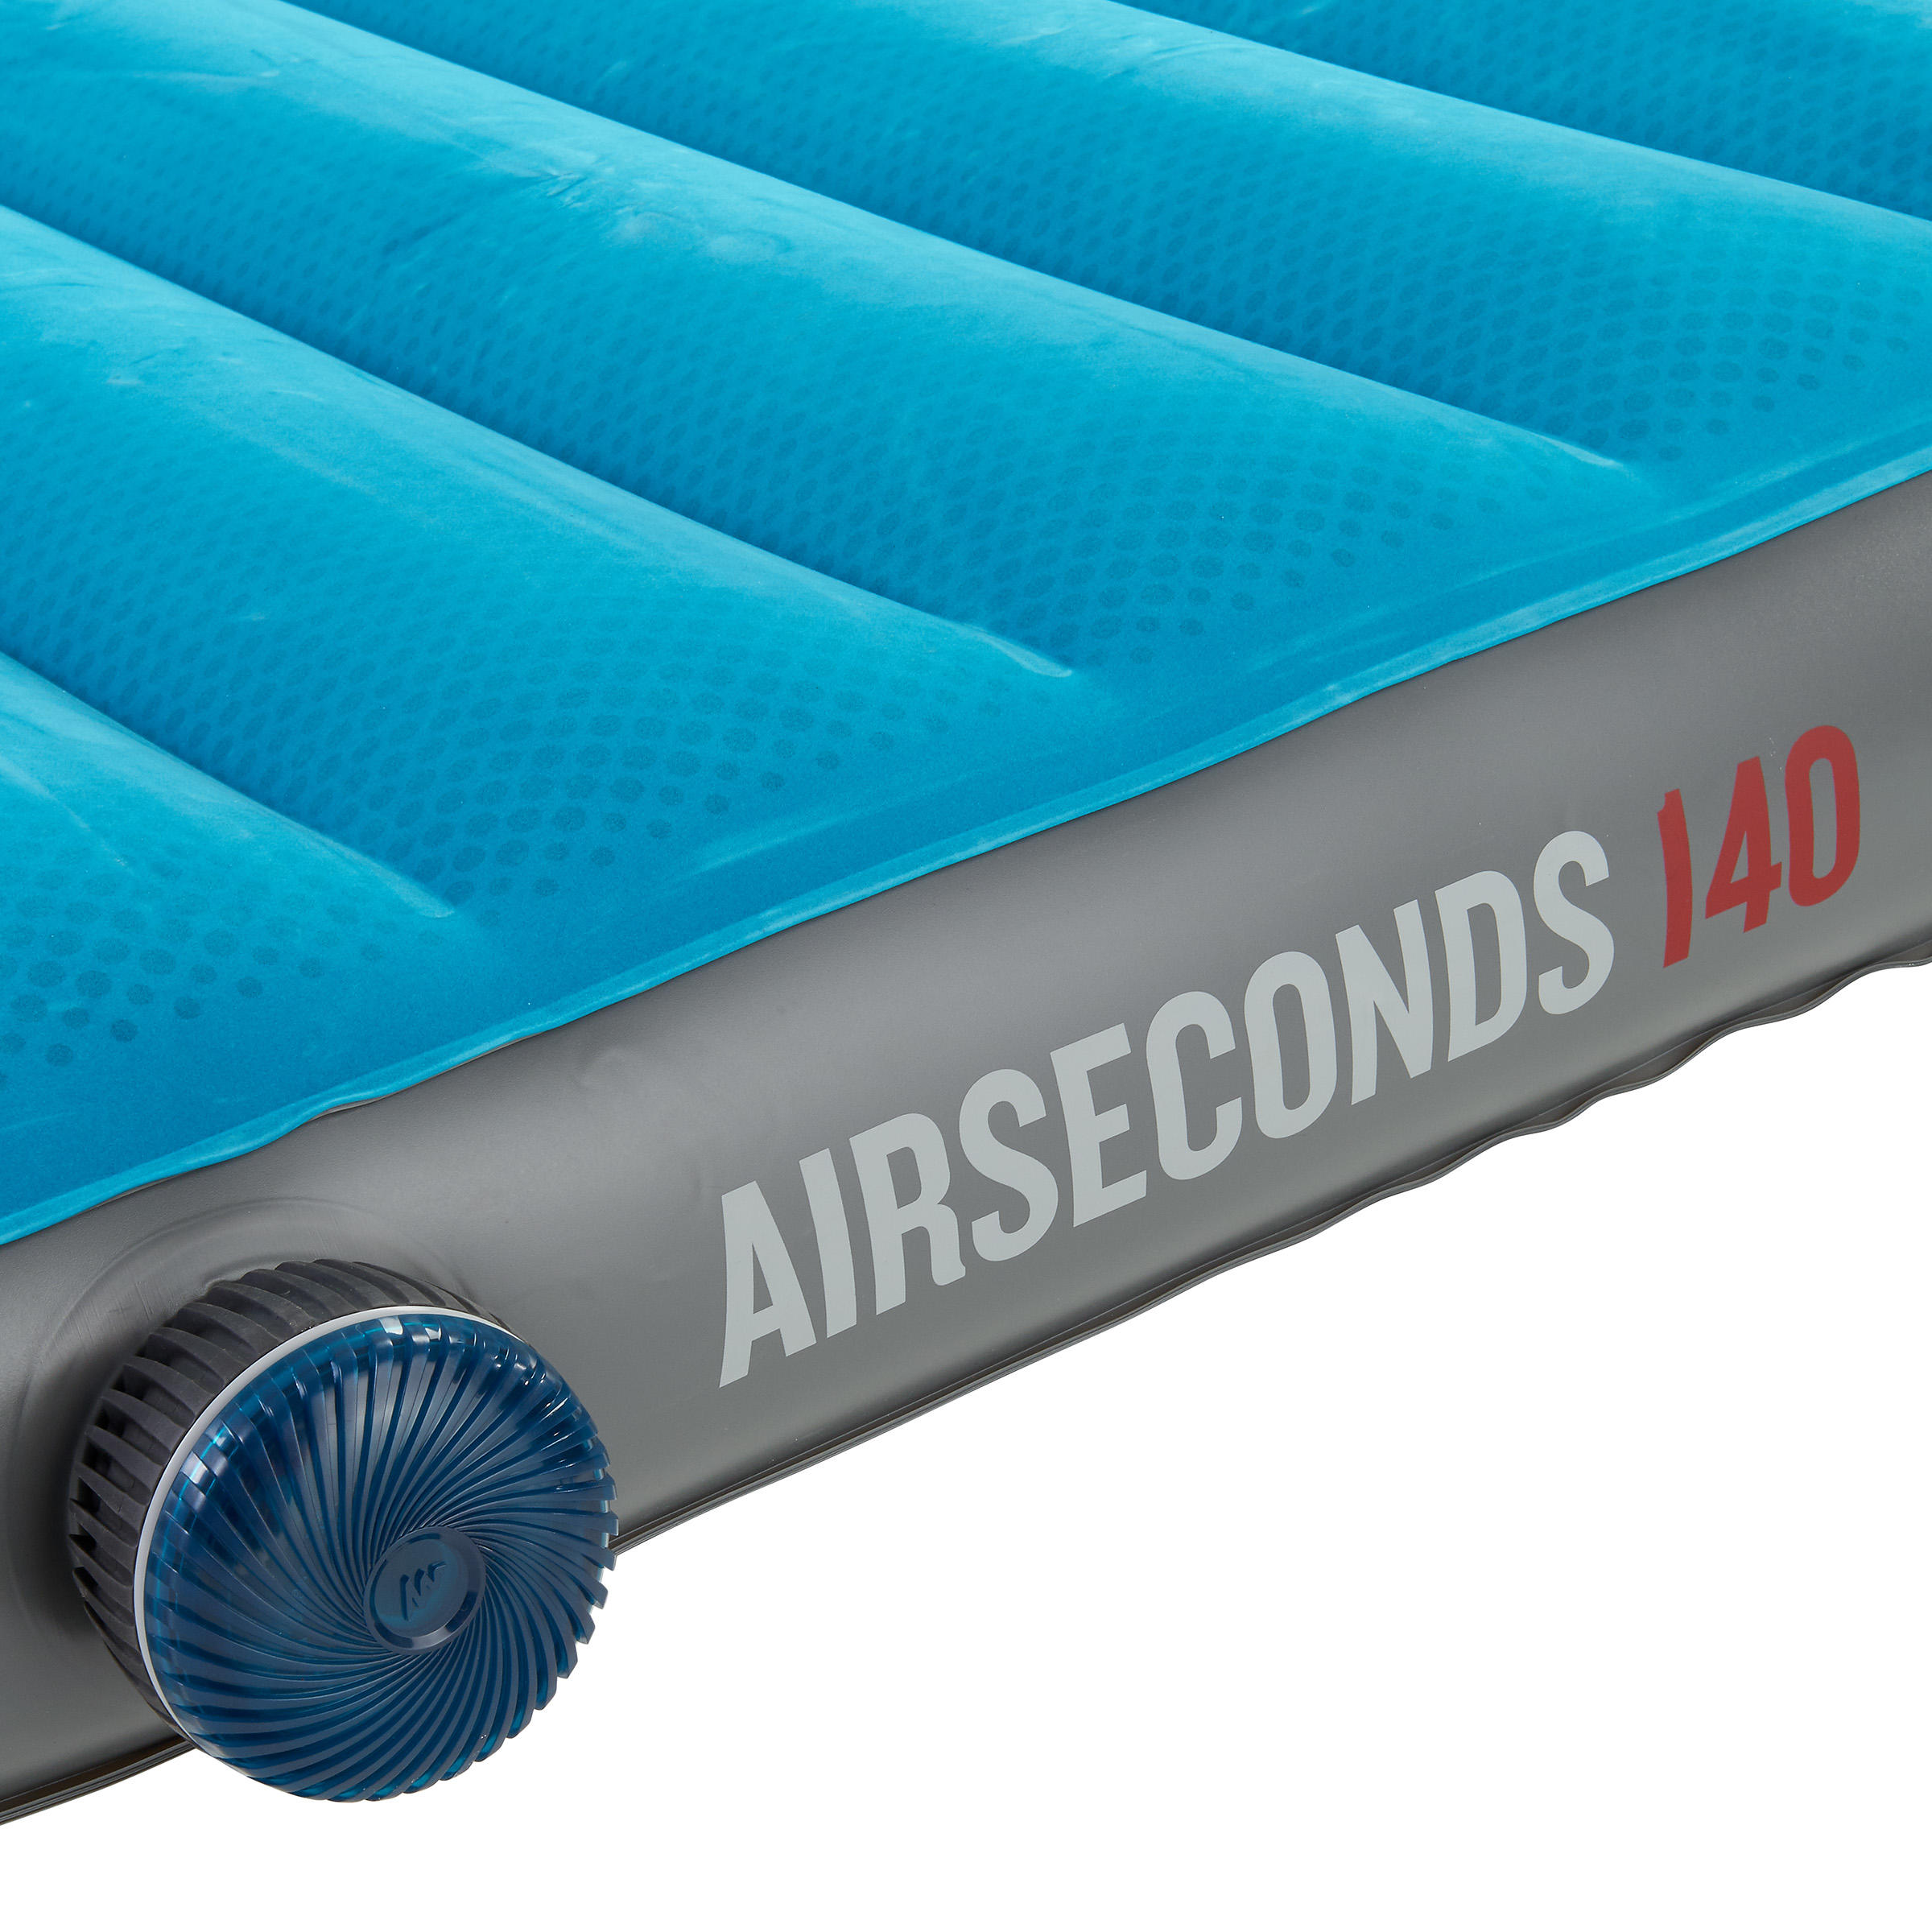 Air Seconds 2 Person Inflatable Mattress 6/10